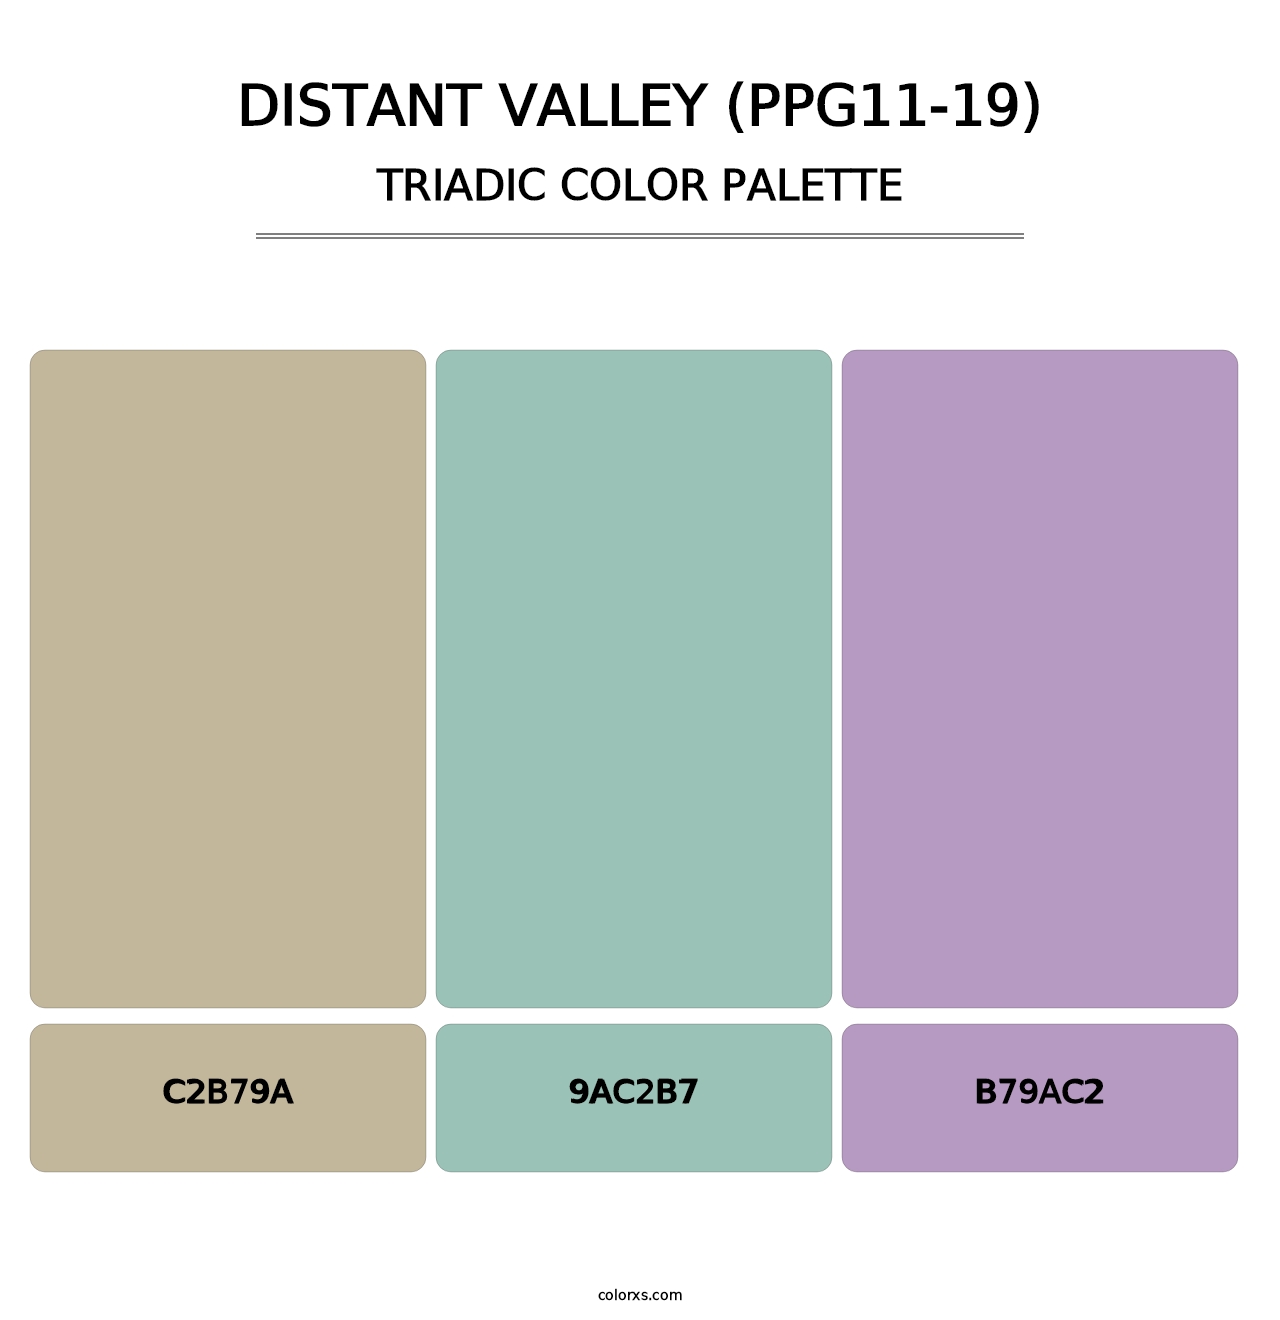 Distant Valley (PPG11-19) - Triadic Color Palette